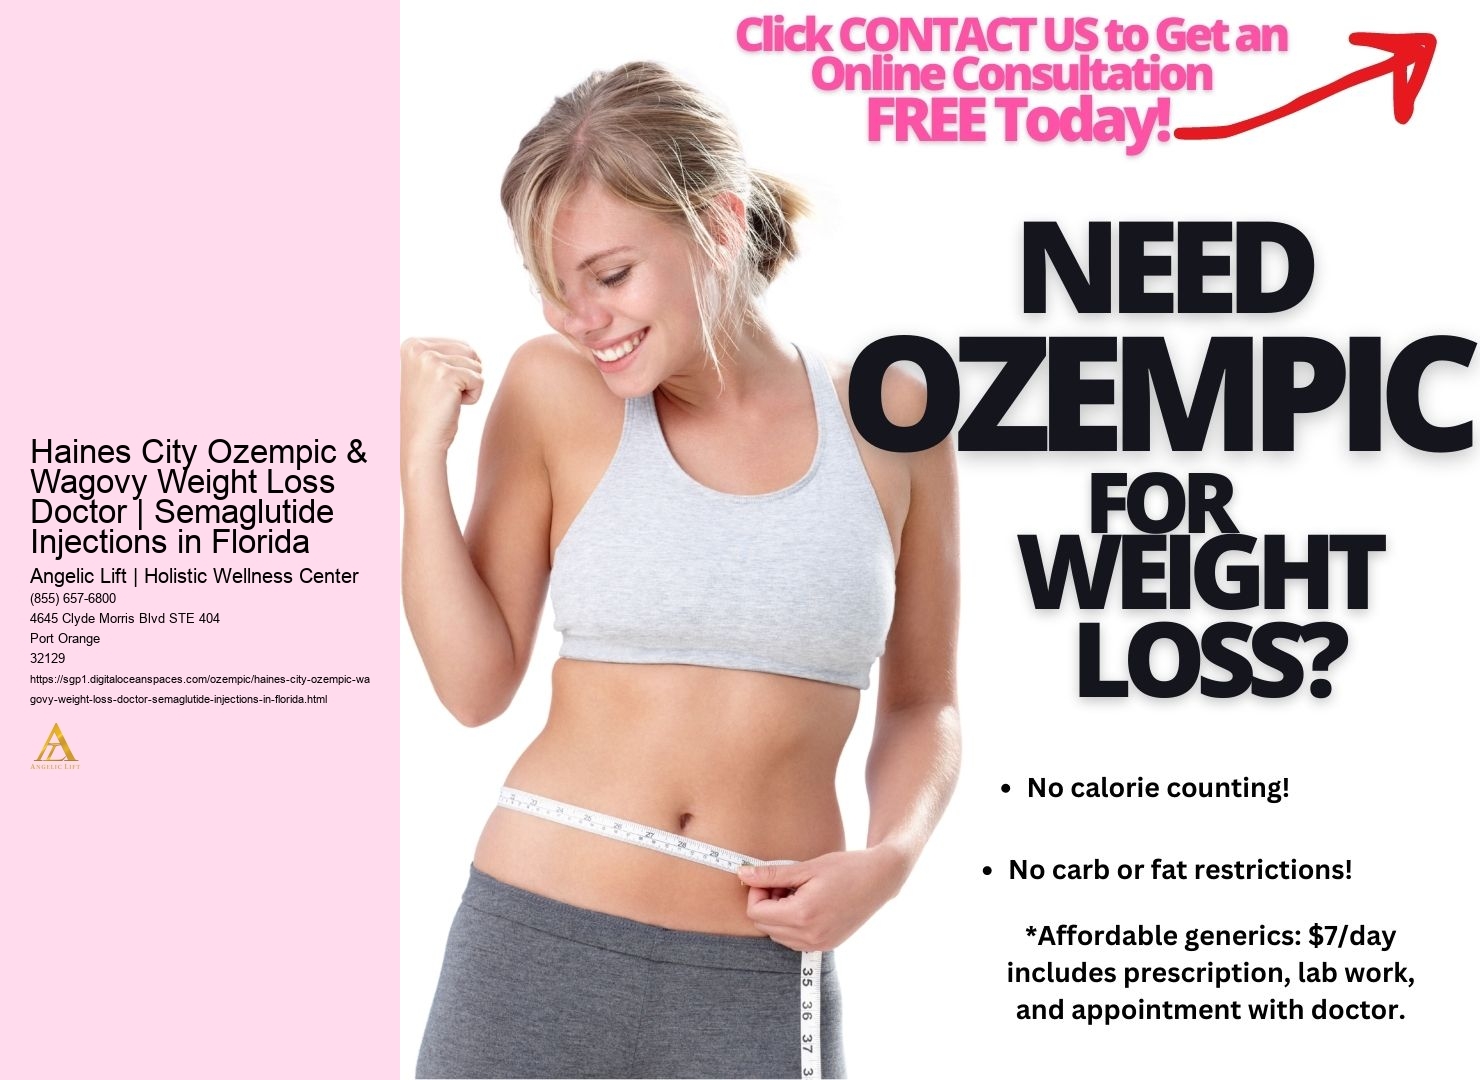 Haines City Ozempic & Wagovy Weight Loss Doctor | Semaglutide Injections in Florida